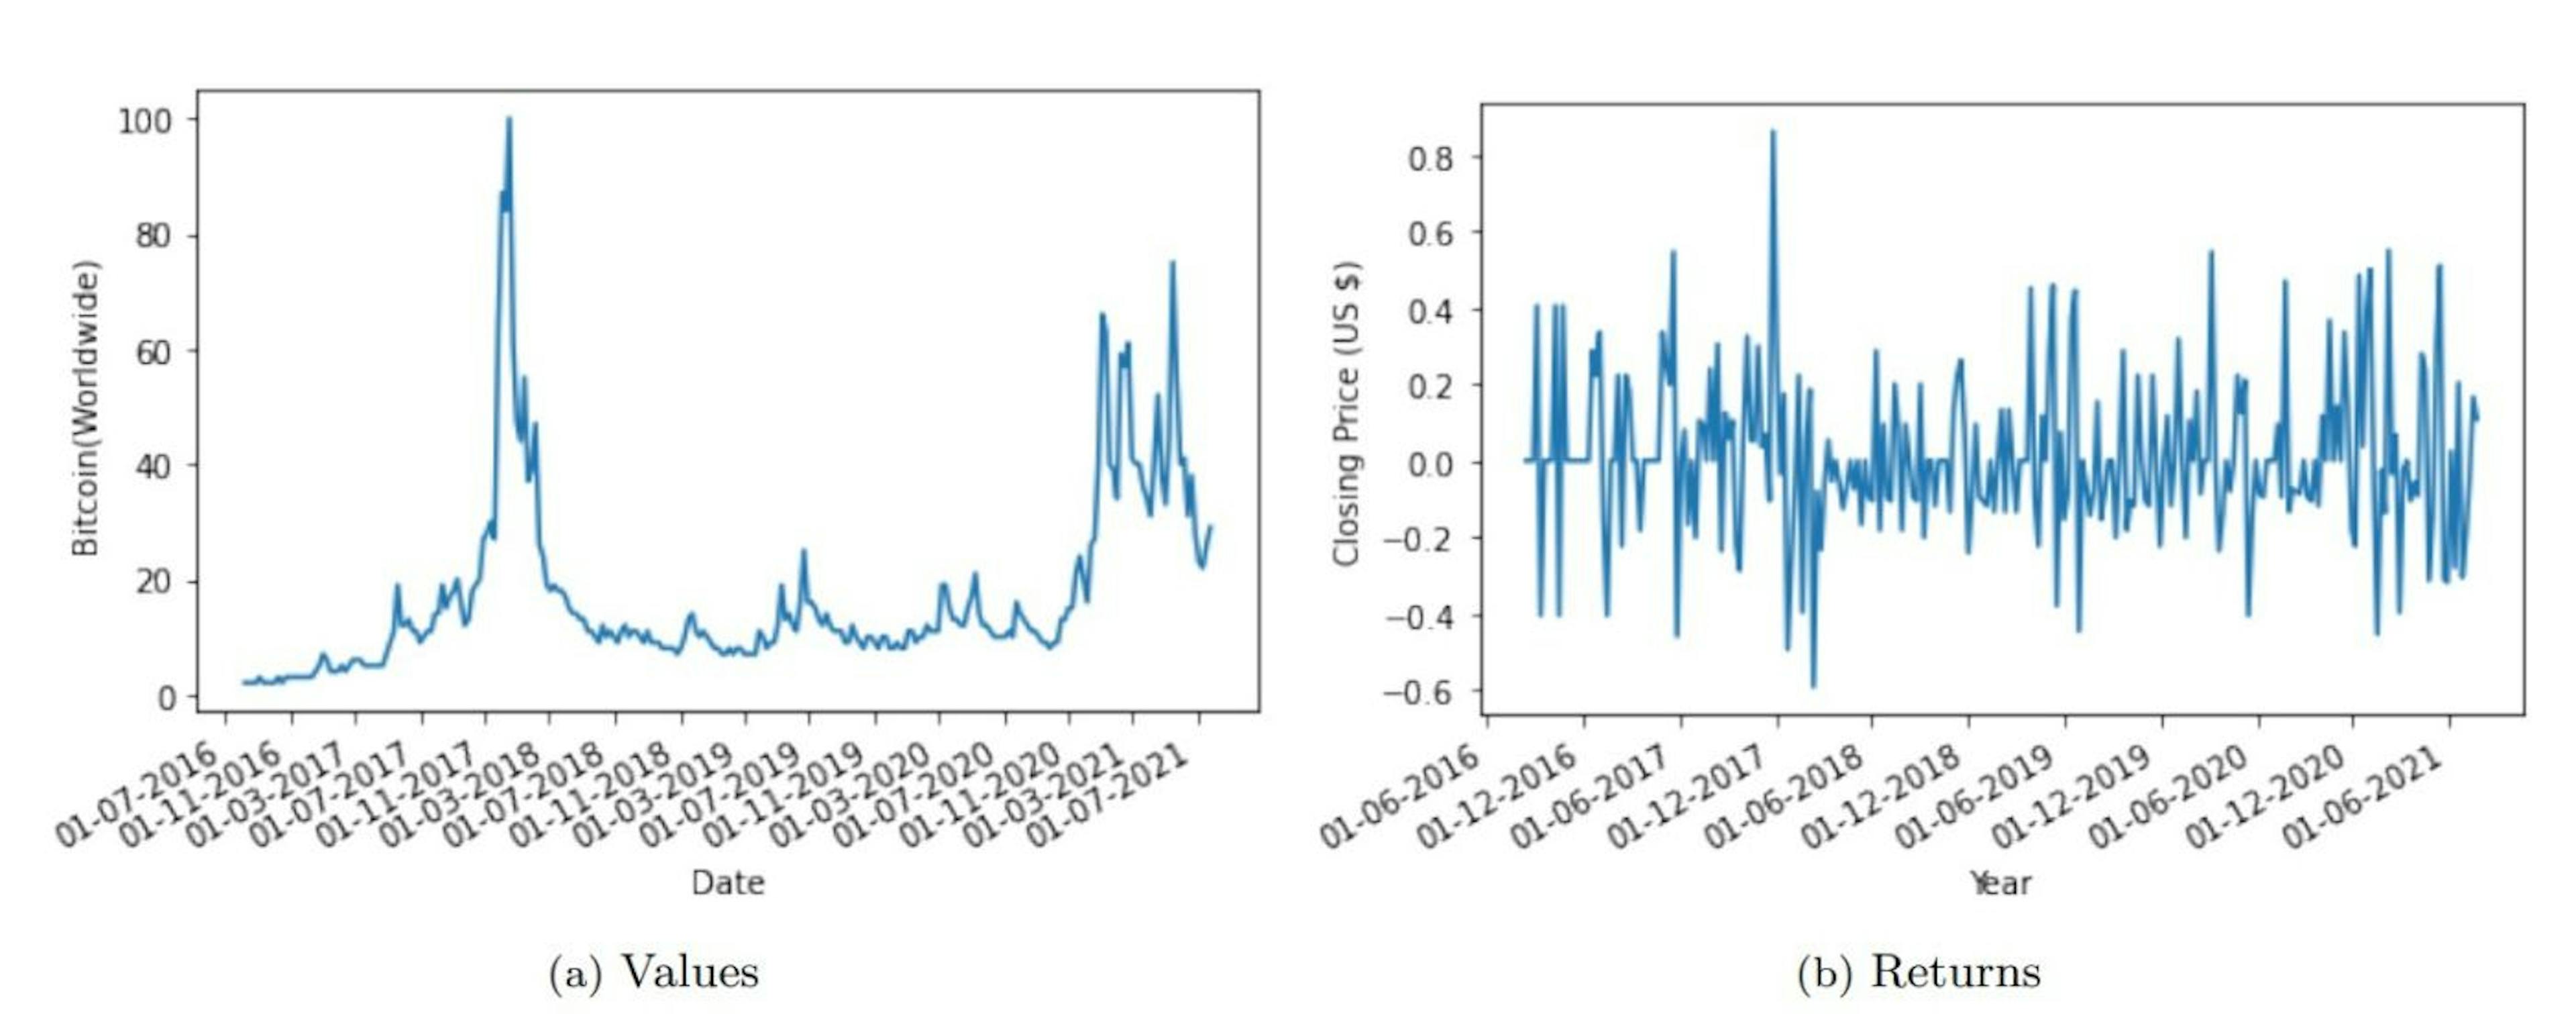 Figure 2: Sentiment data for bitcoin during 2016-2021